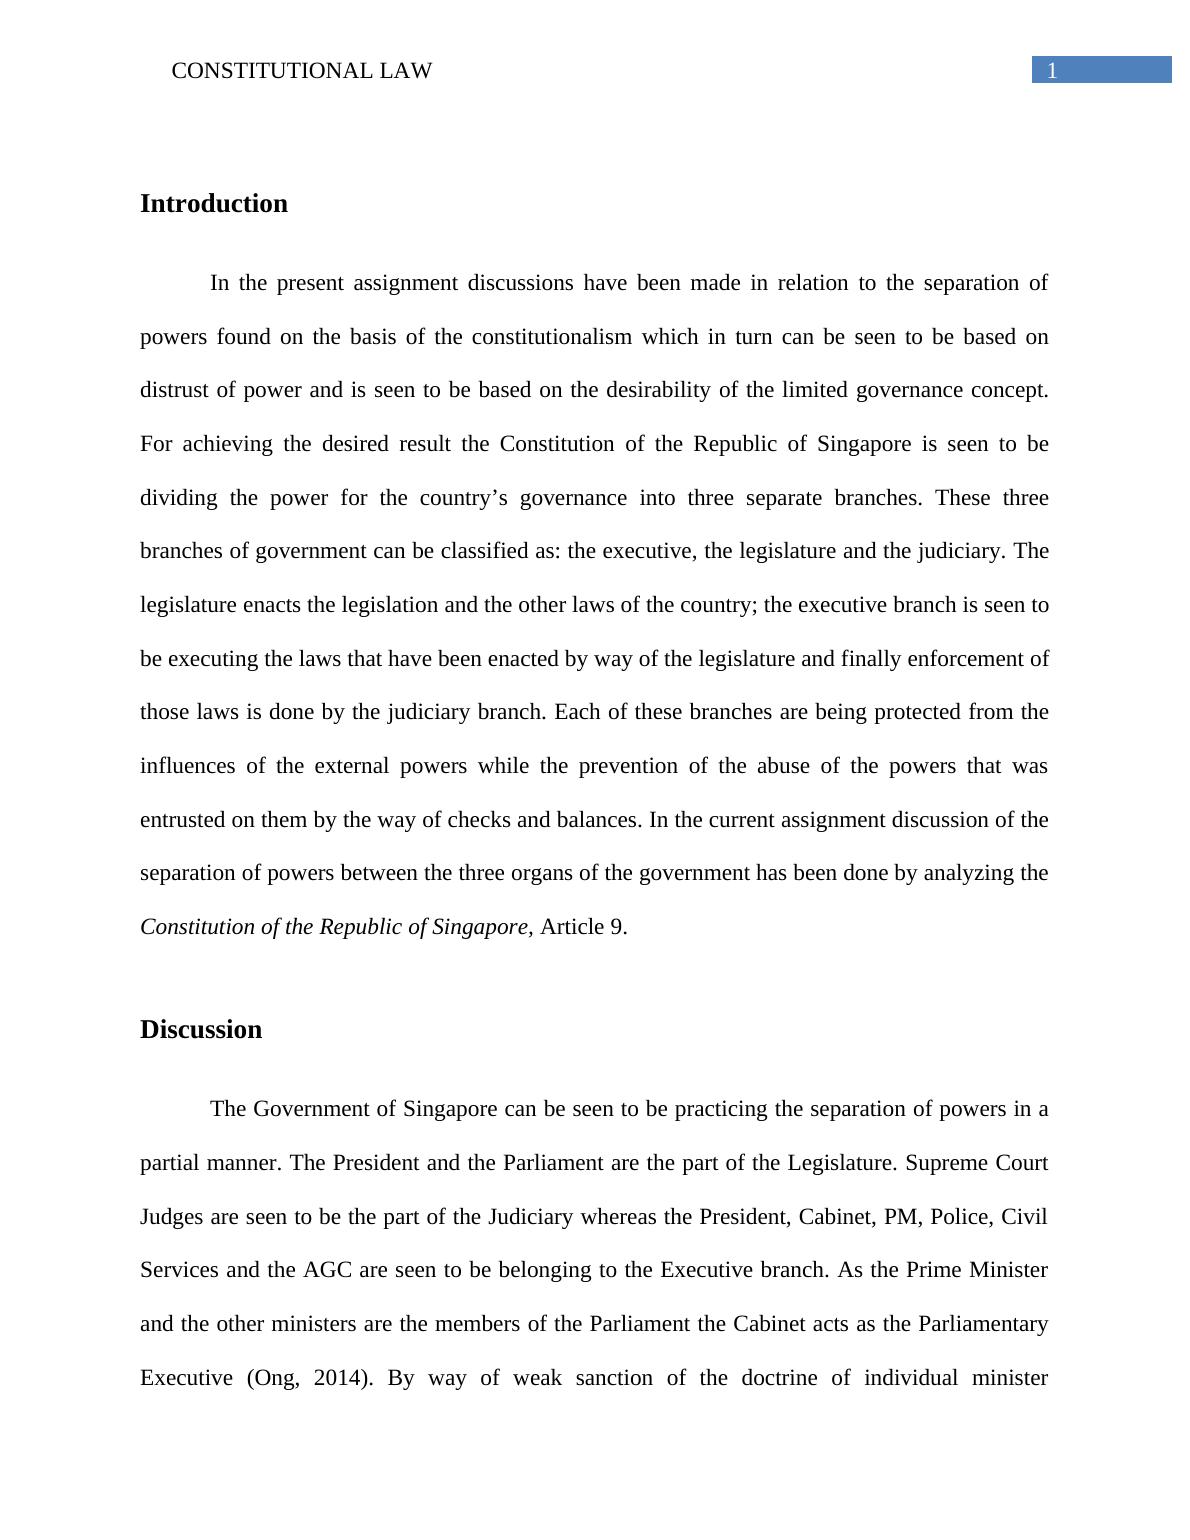 Constitutional Law: Separation of Powers and Fundamental Liberties in Singapore_2